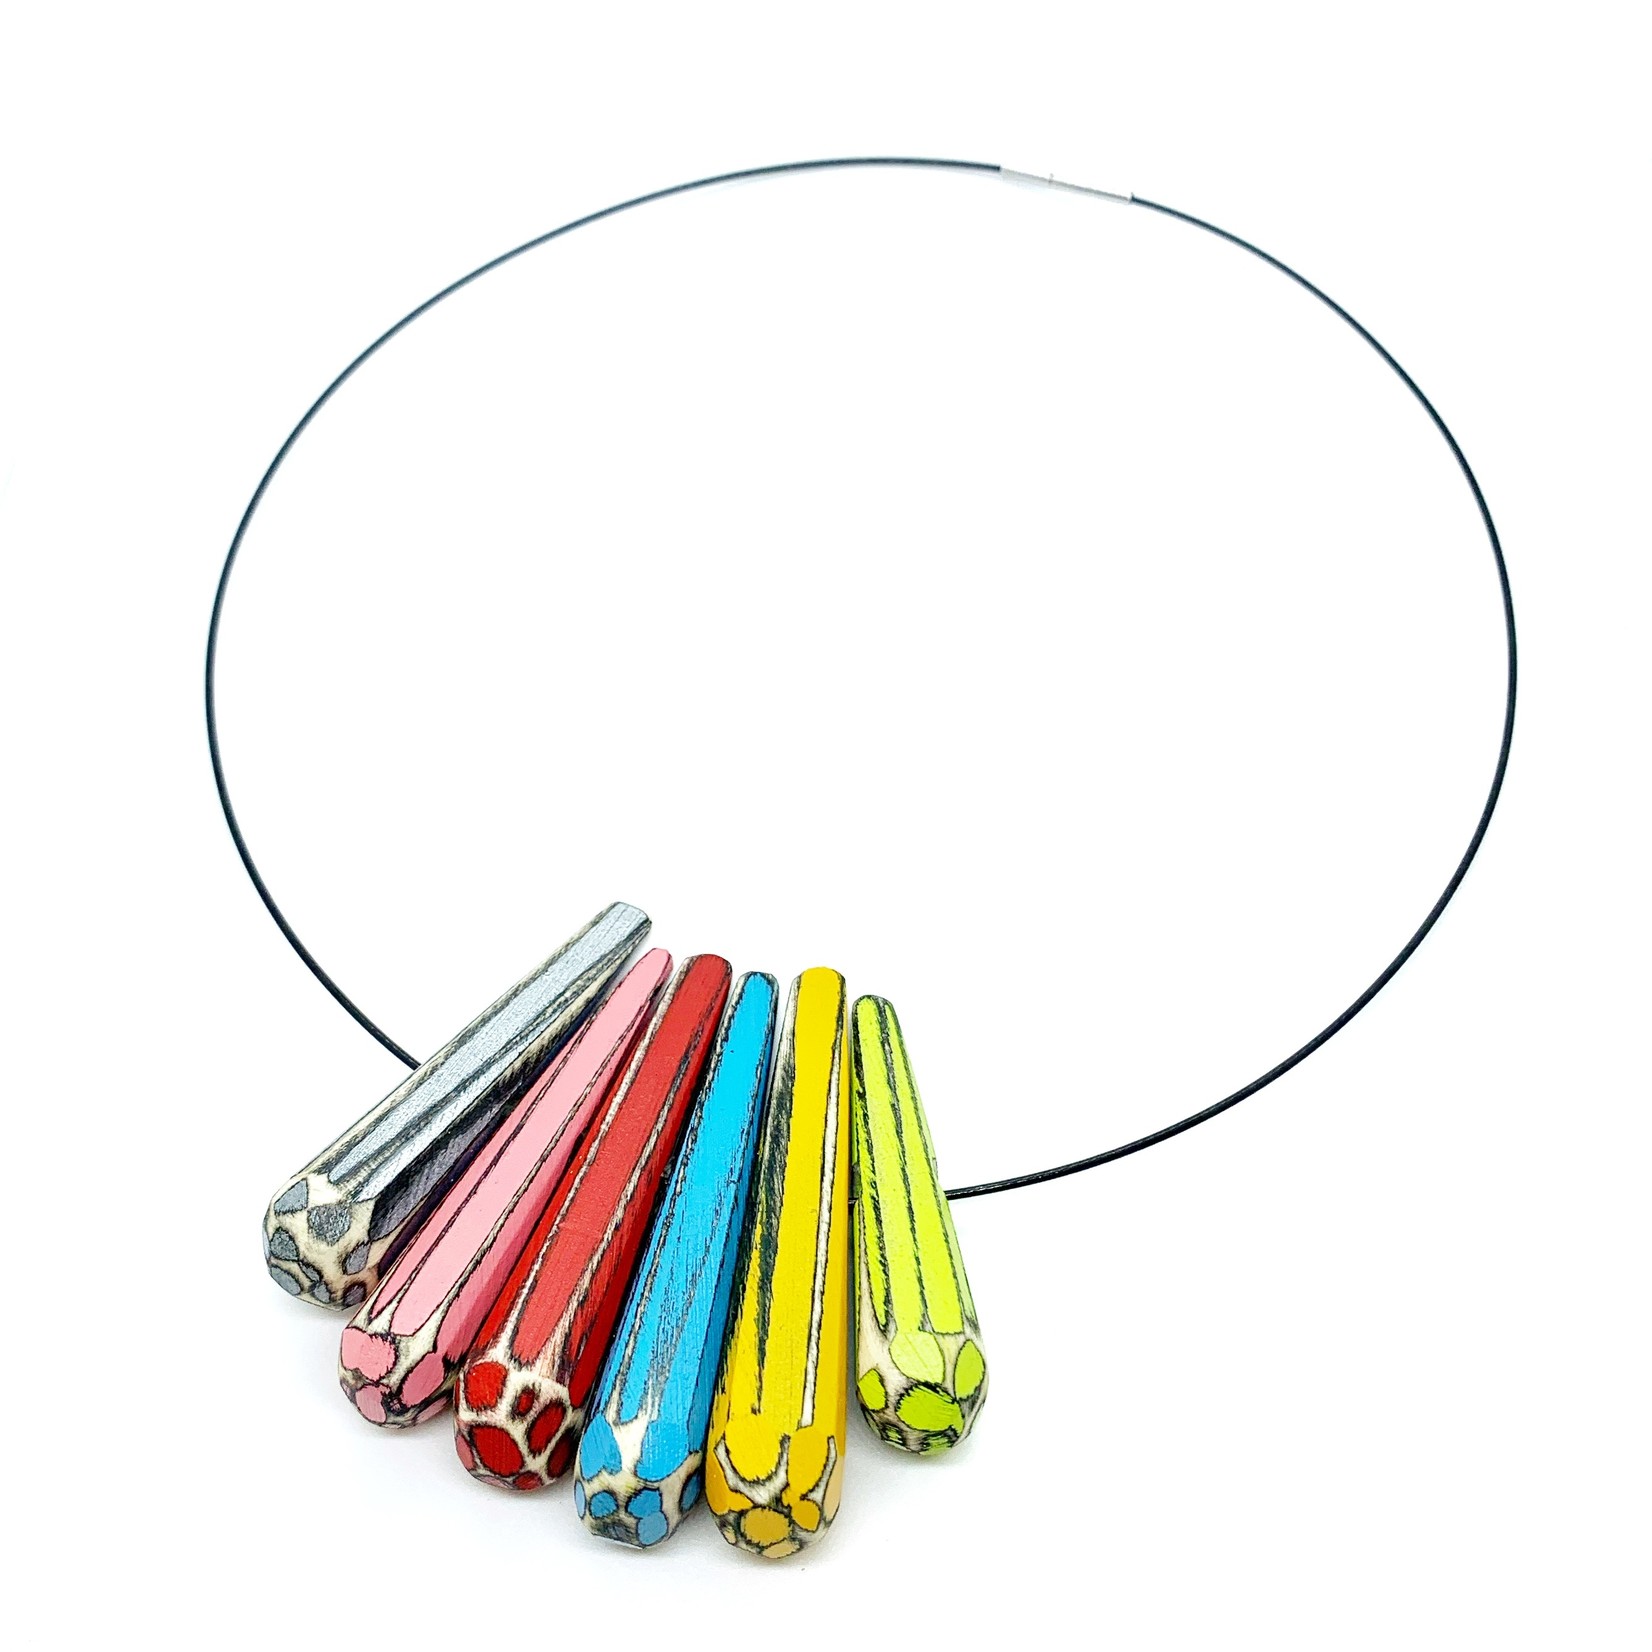 Morgan Hill MH Playtime necklace